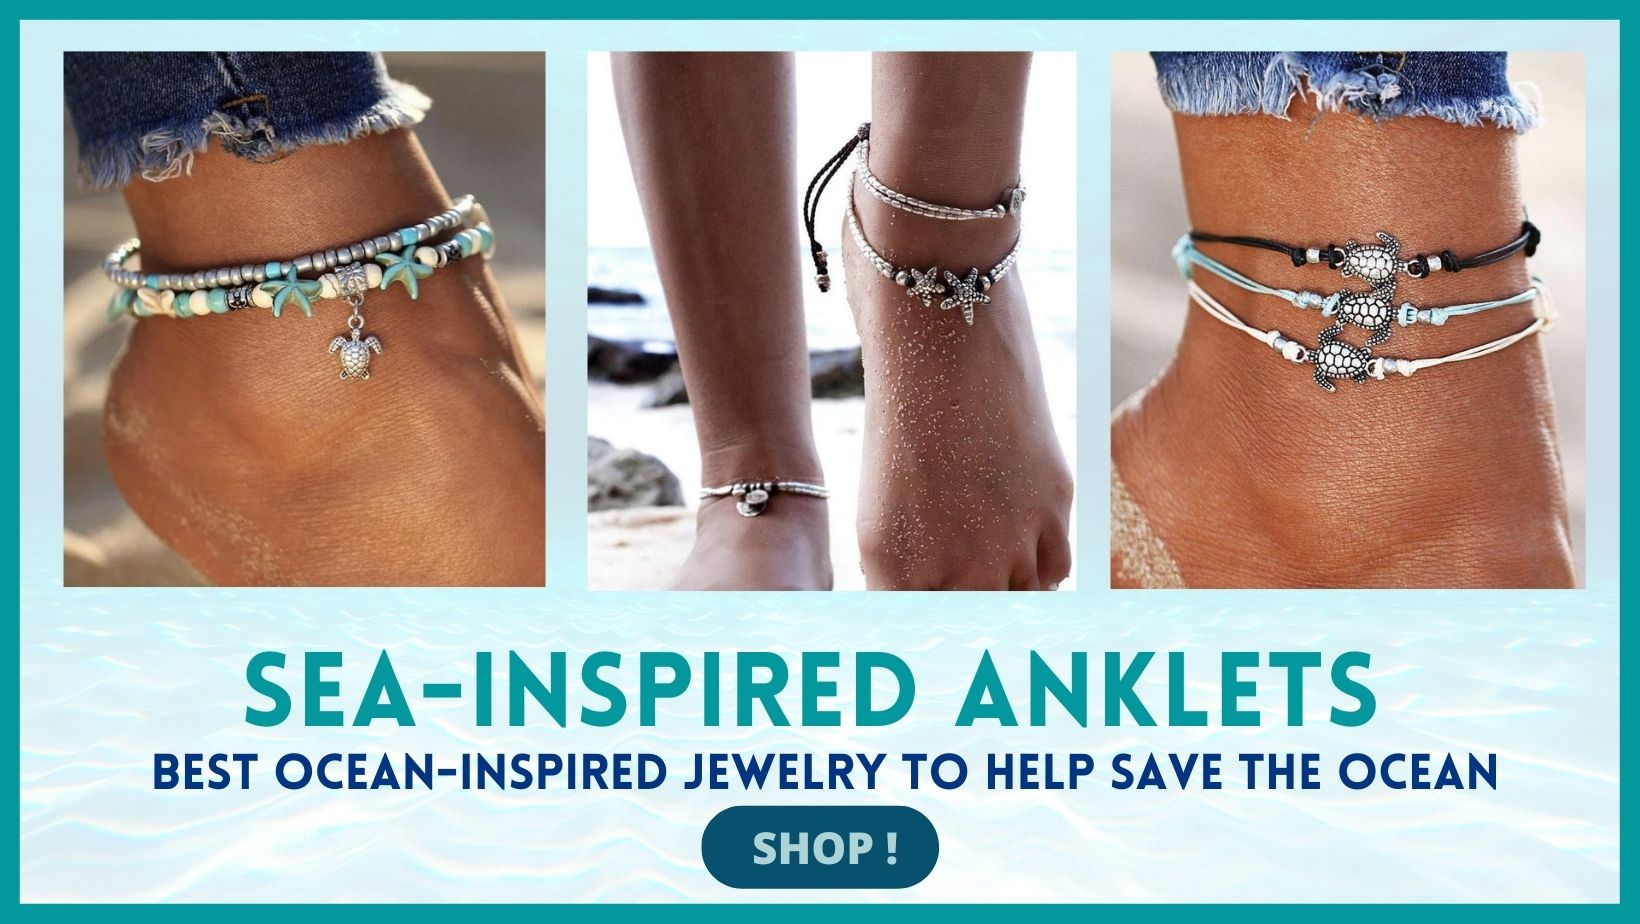 Elephant anklet means